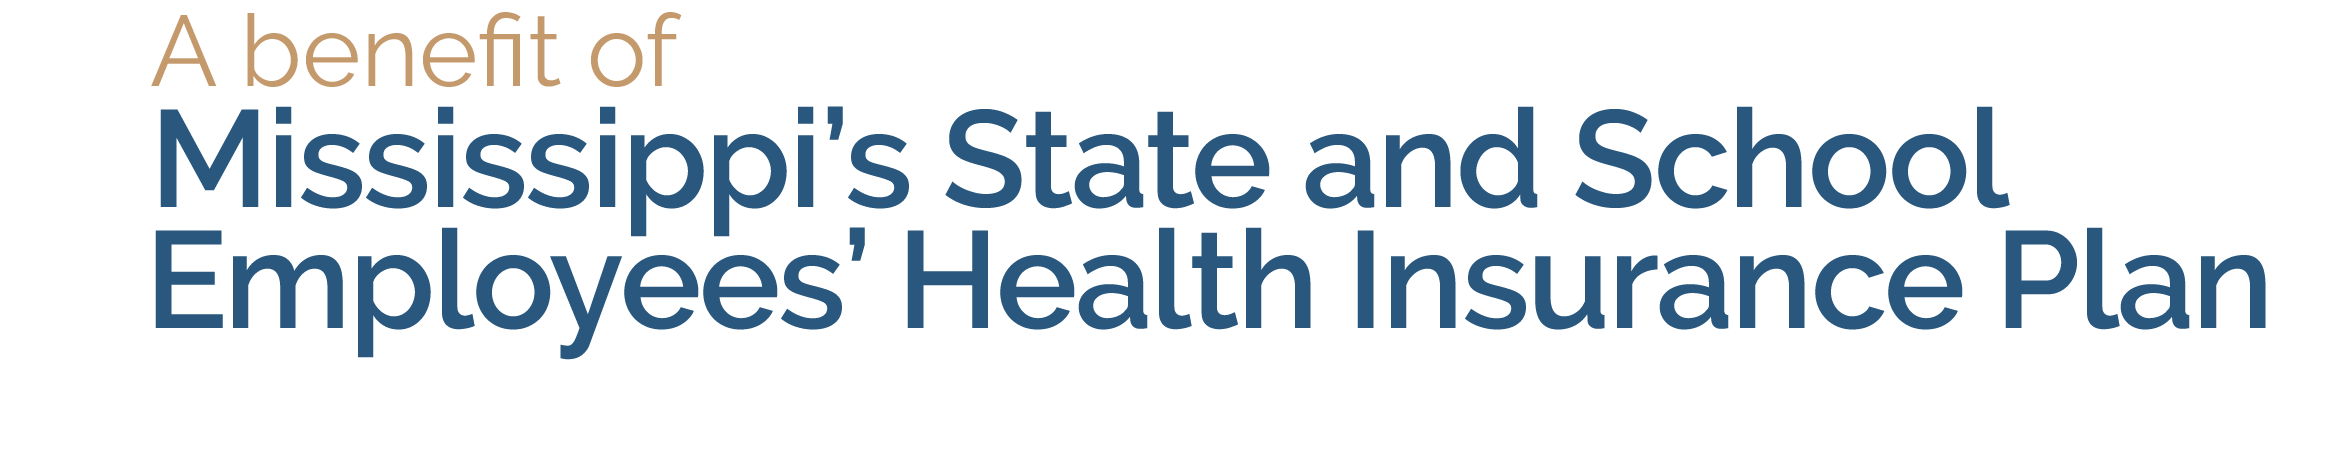 Mississippi’s State and School Employees’ Health Insurance Plan